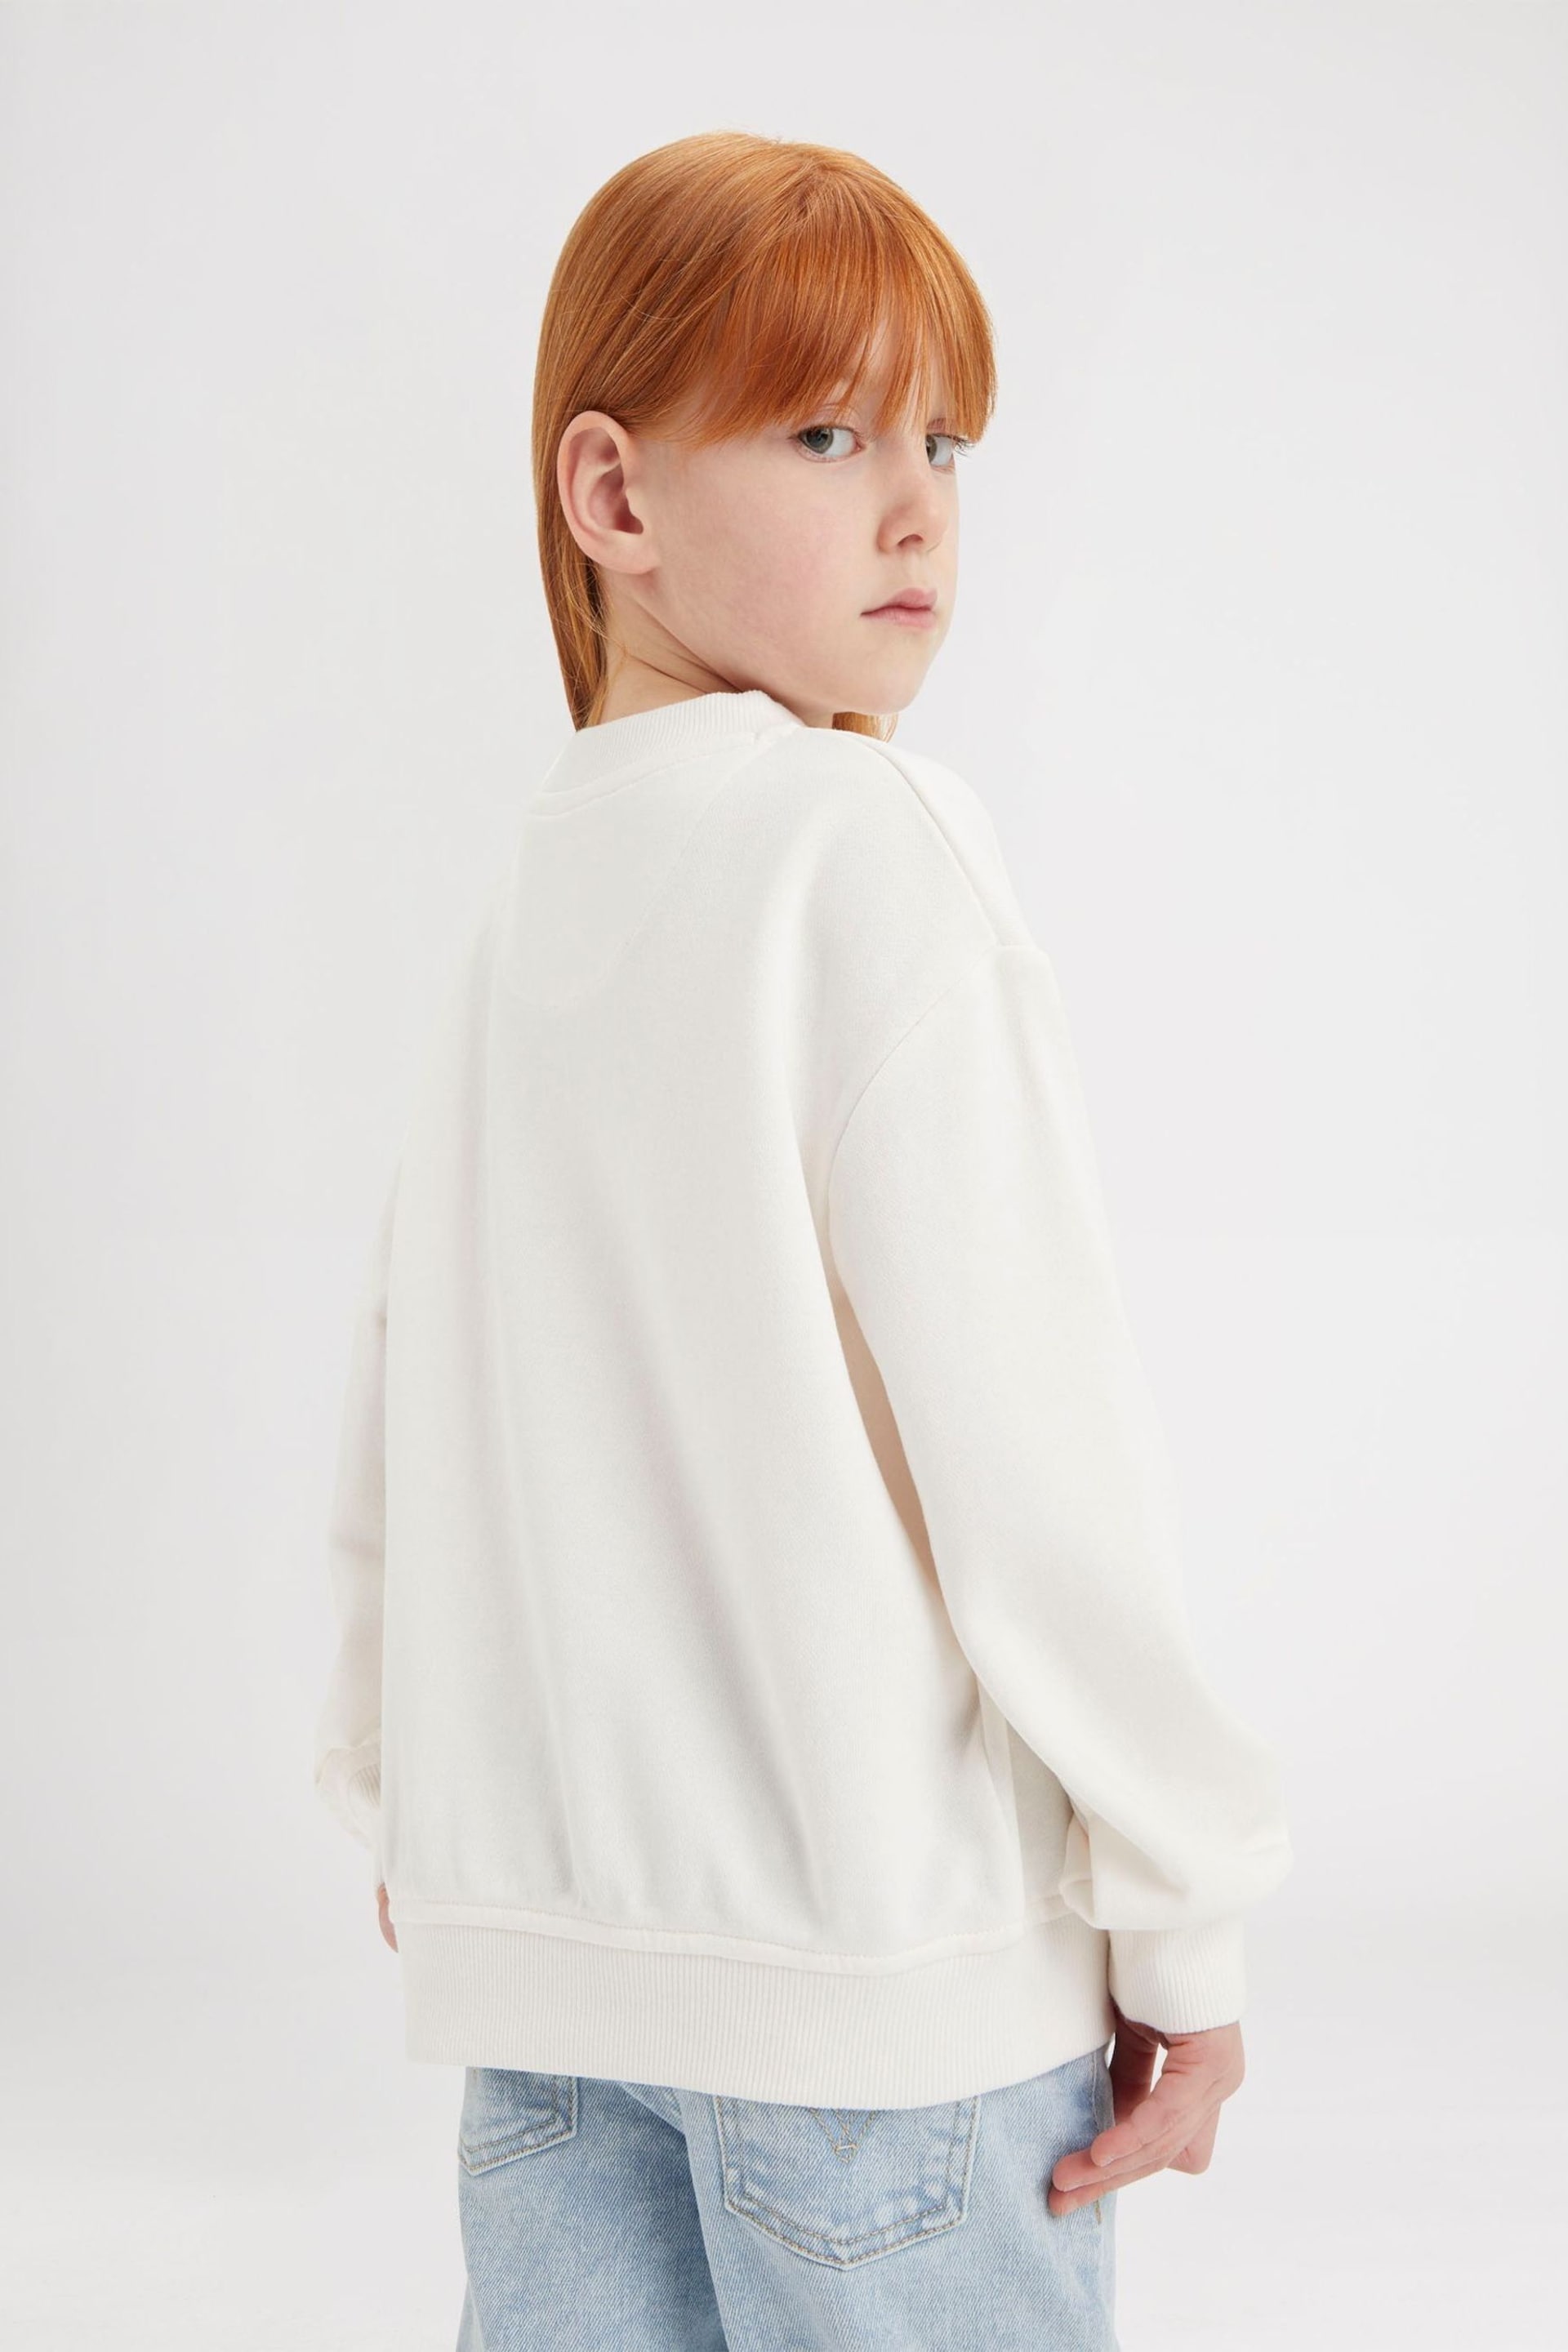 Levi's® White Floral Logo Crew Neck Sweater Jumper - Image 2 of 7